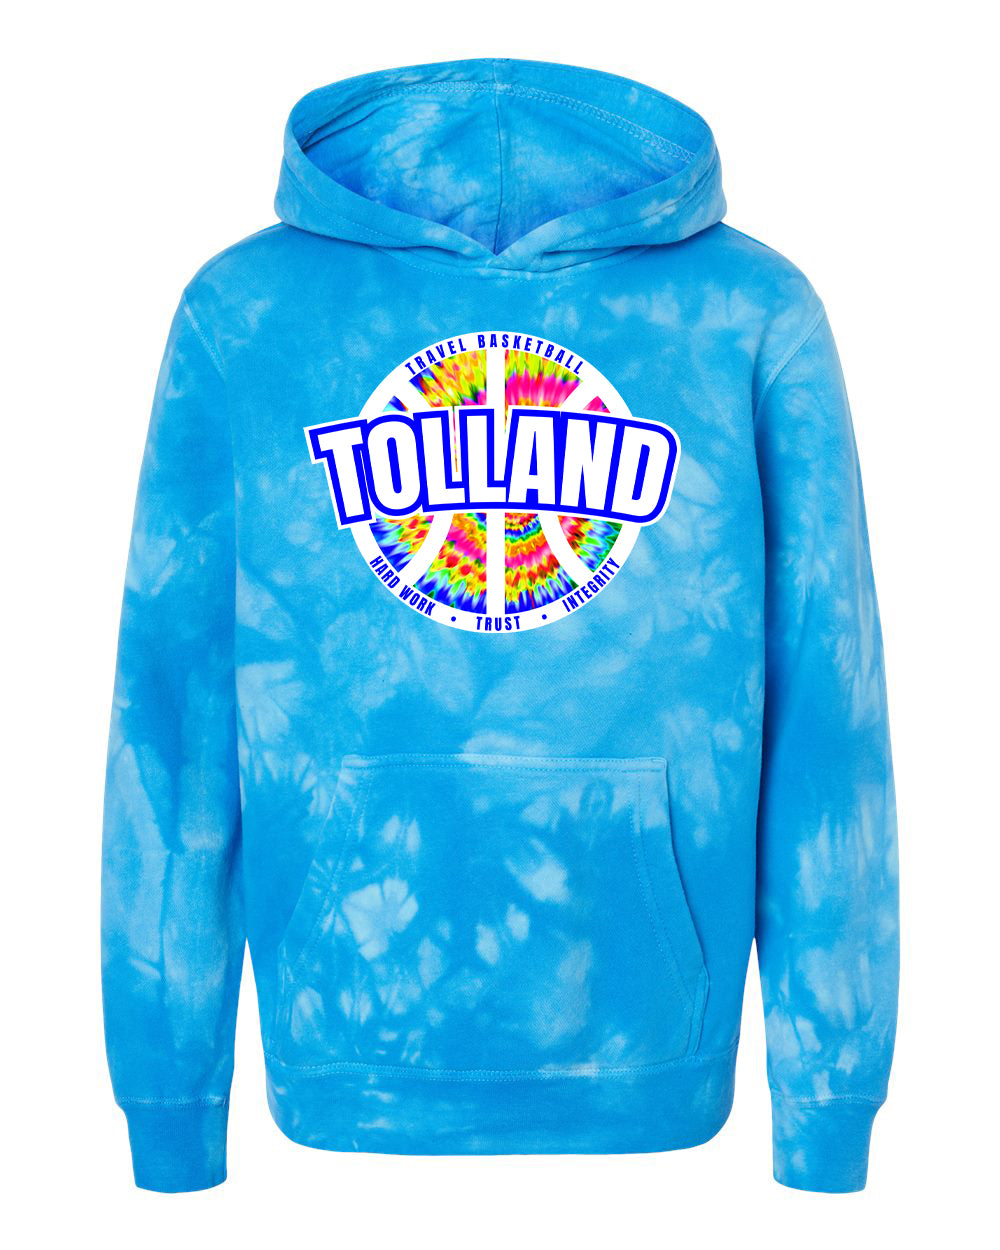 Tolland TB Youth Cotton Candy Hoodie "Tye Dye" - PRM1500TD (color options available)